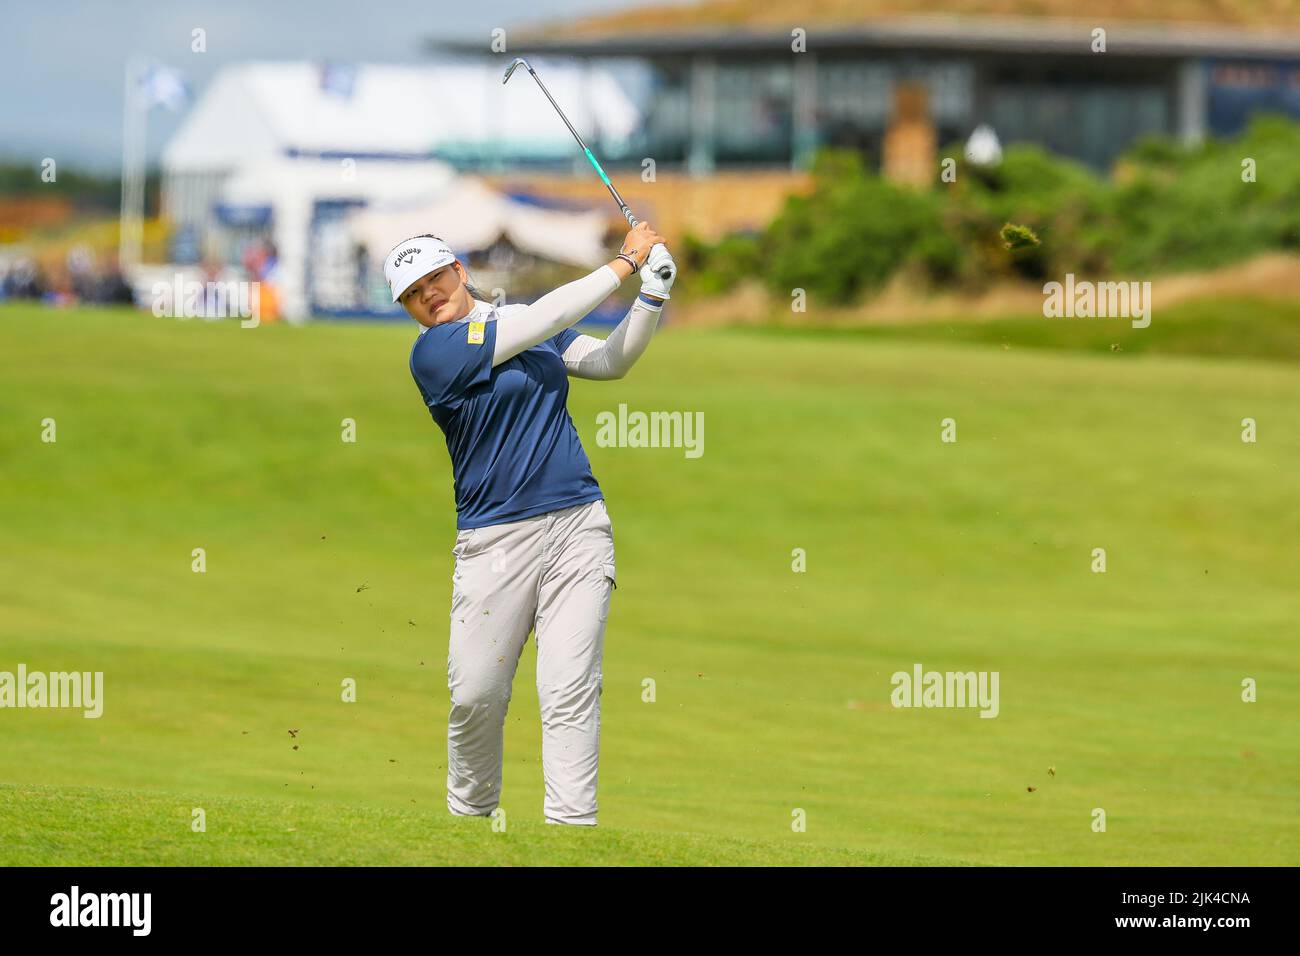 Irvine, UK. 30th July, 2022. The third round of the Trust Golf Women's Scottish Golf took place with 75 players making the cut. Heavy overnight rain from Friday into Saturday made for a softer and more testing course. Wichanee Meechai playing her second shot from the 10th fairway. Credit: Findlay/Alamy Live News Stock Photo